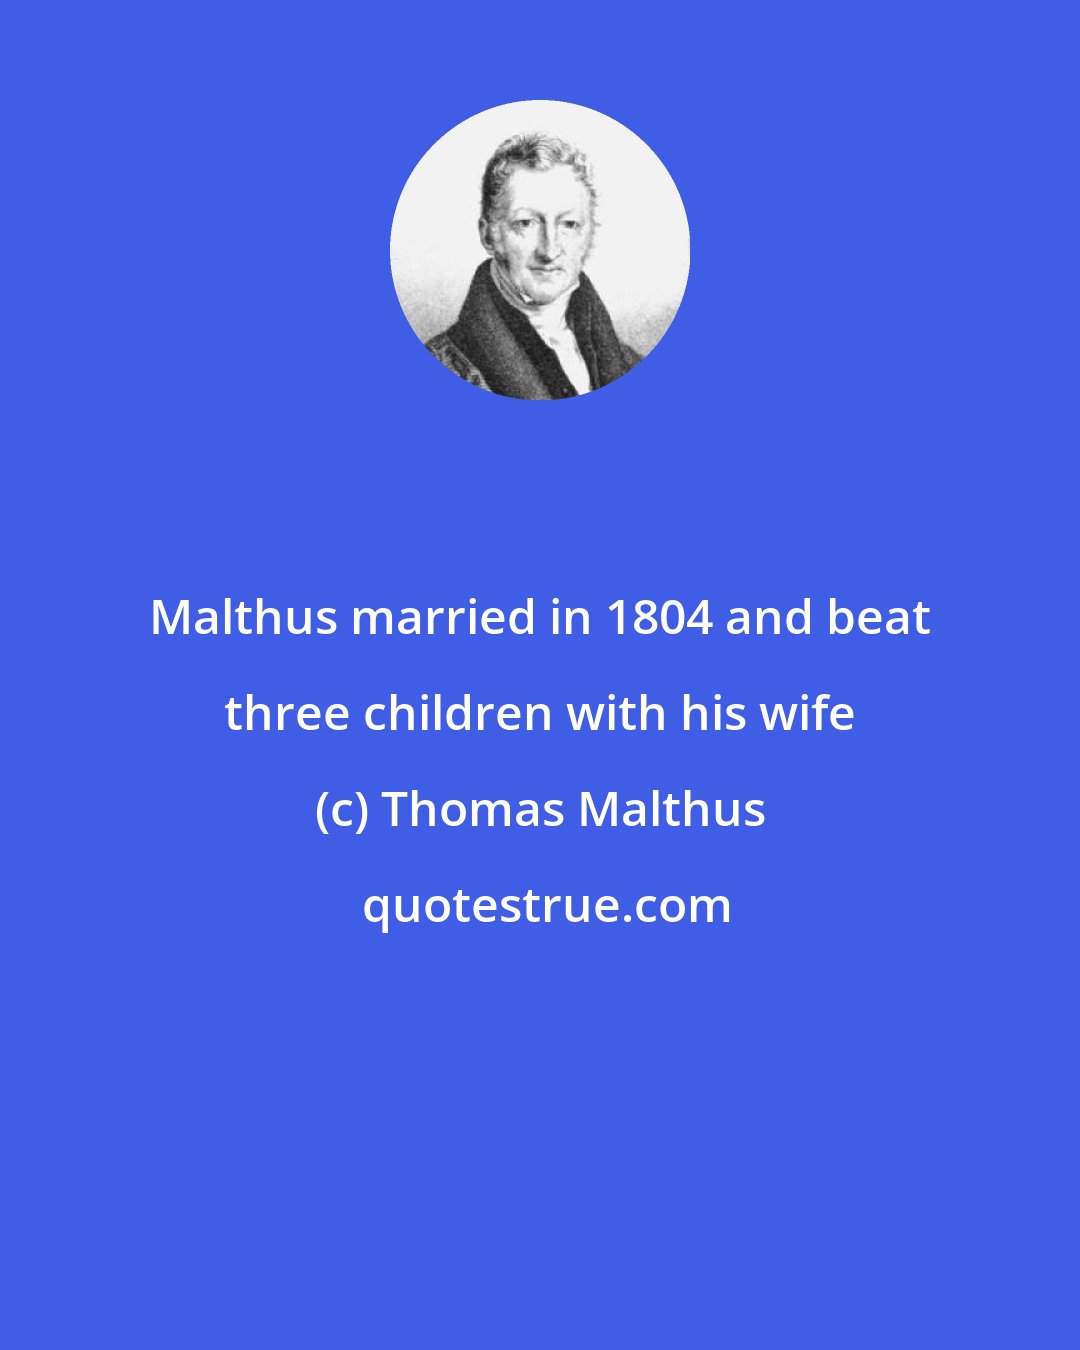 Thomas Malthus: Malthus married in 1804 and beat three children with his wife